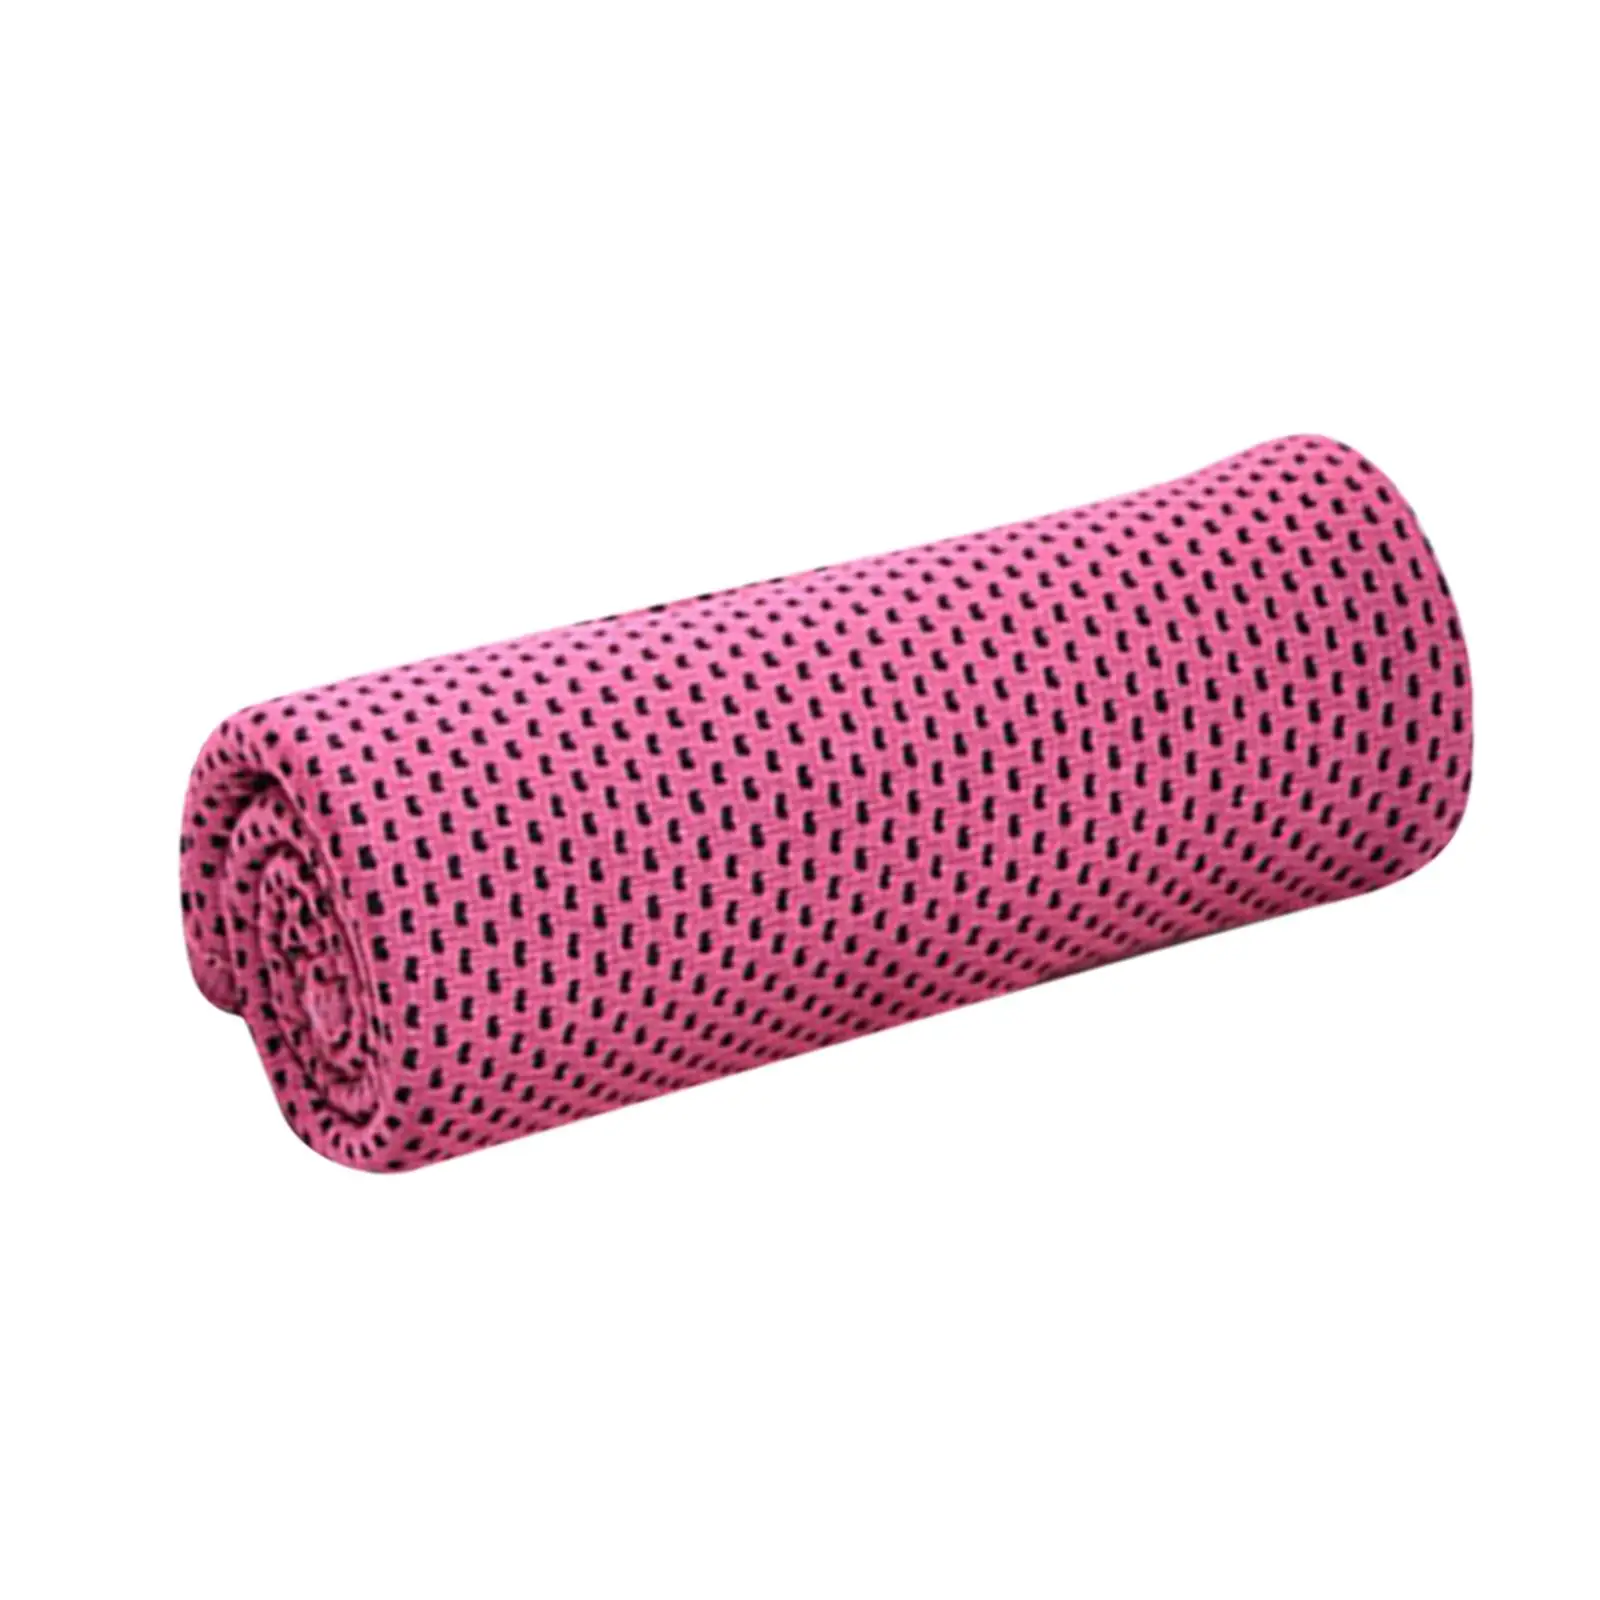 Cooling Towel for Neck and Face Hot Weather Breathable Chilly Towel Gym Towel for Outdoor Activities Hiking Camping Yoga Fitness